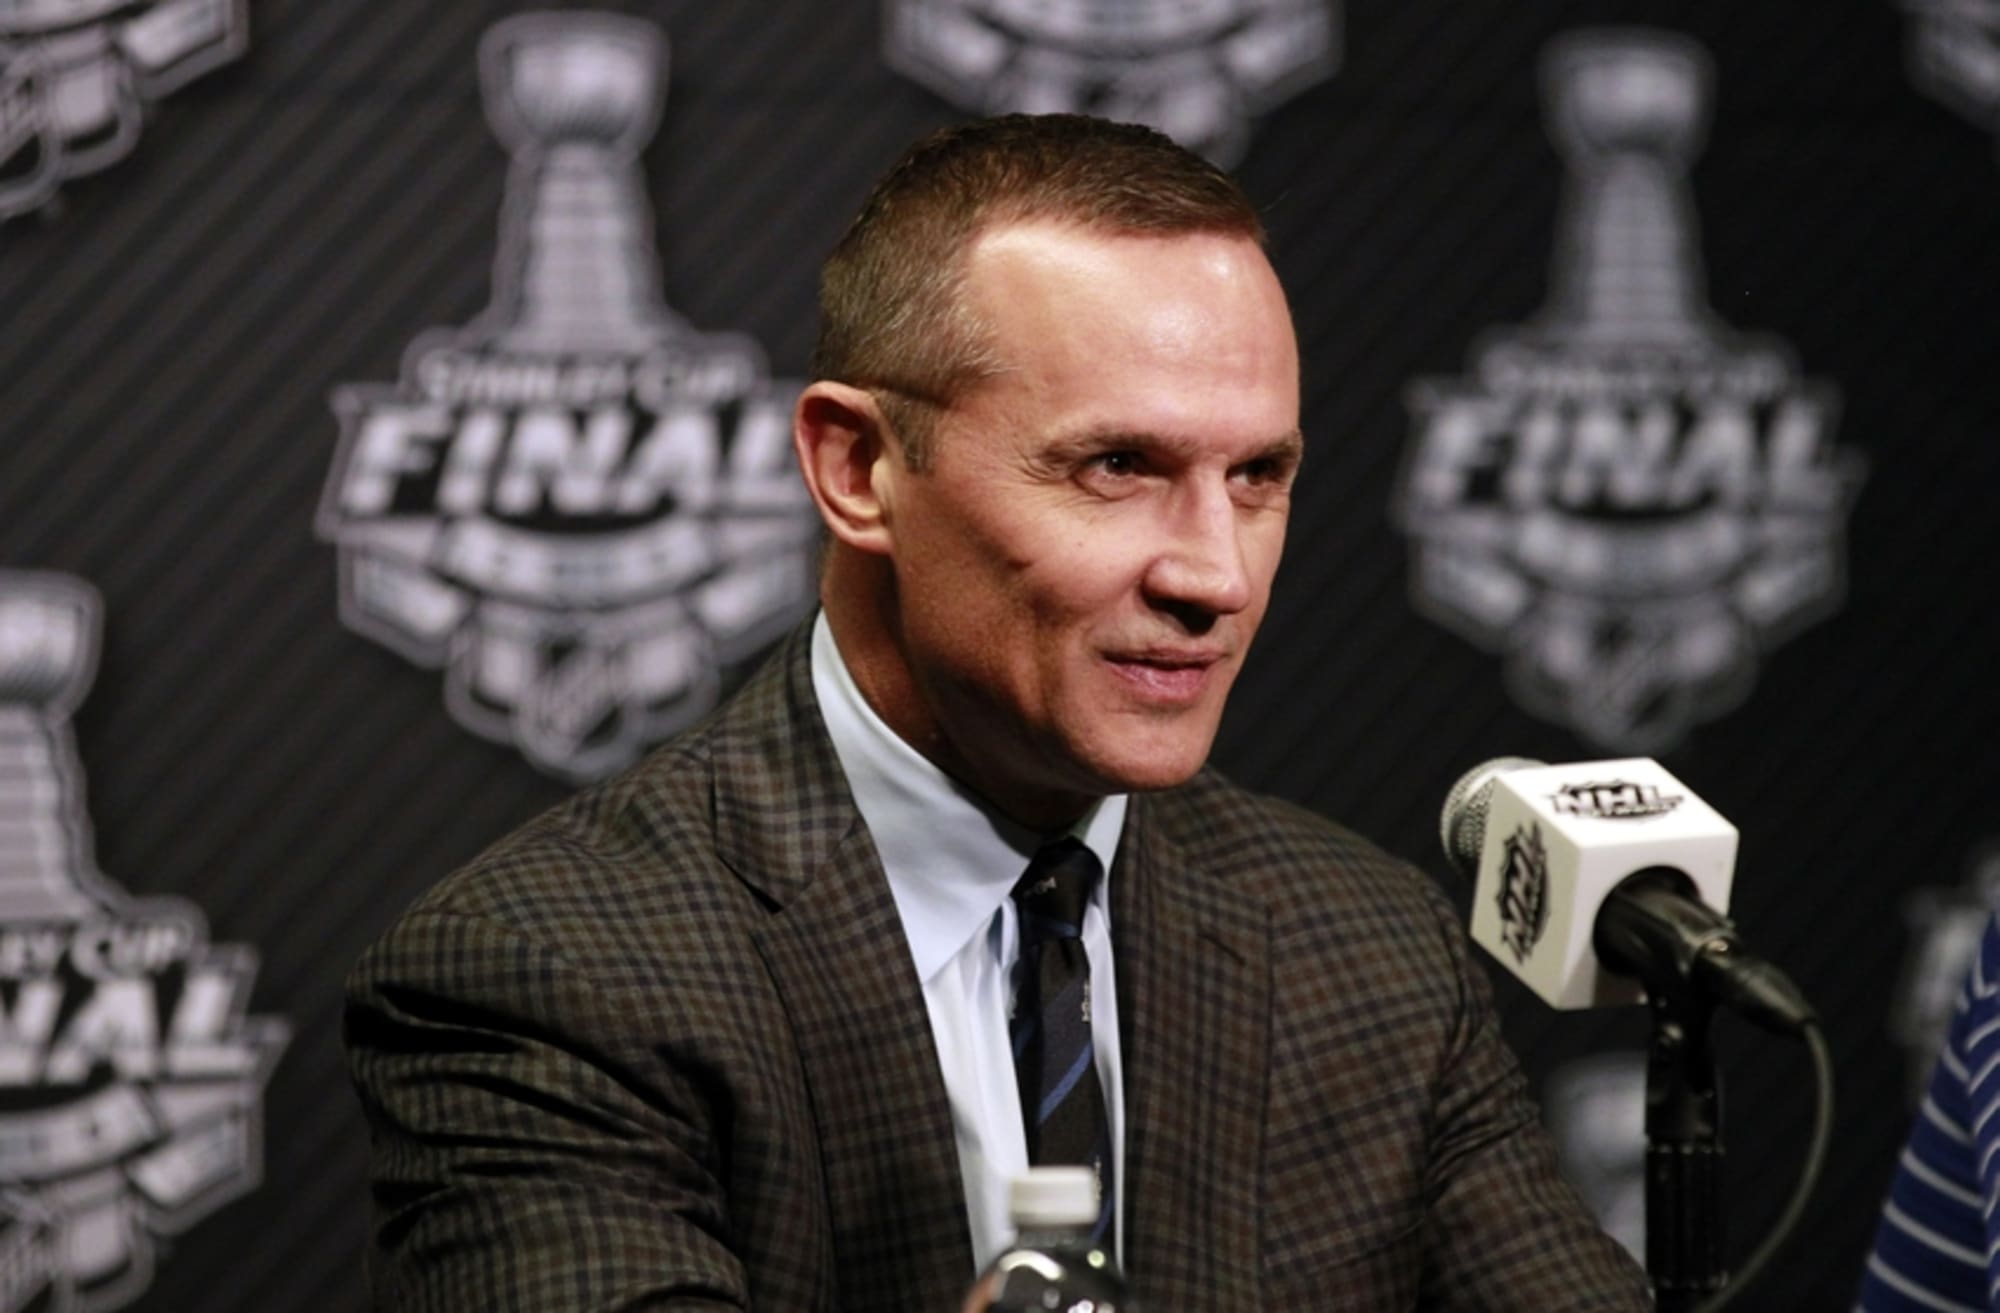 LIVE UPDATES: Steve Yzerman to step down as GM in Tampa Bay